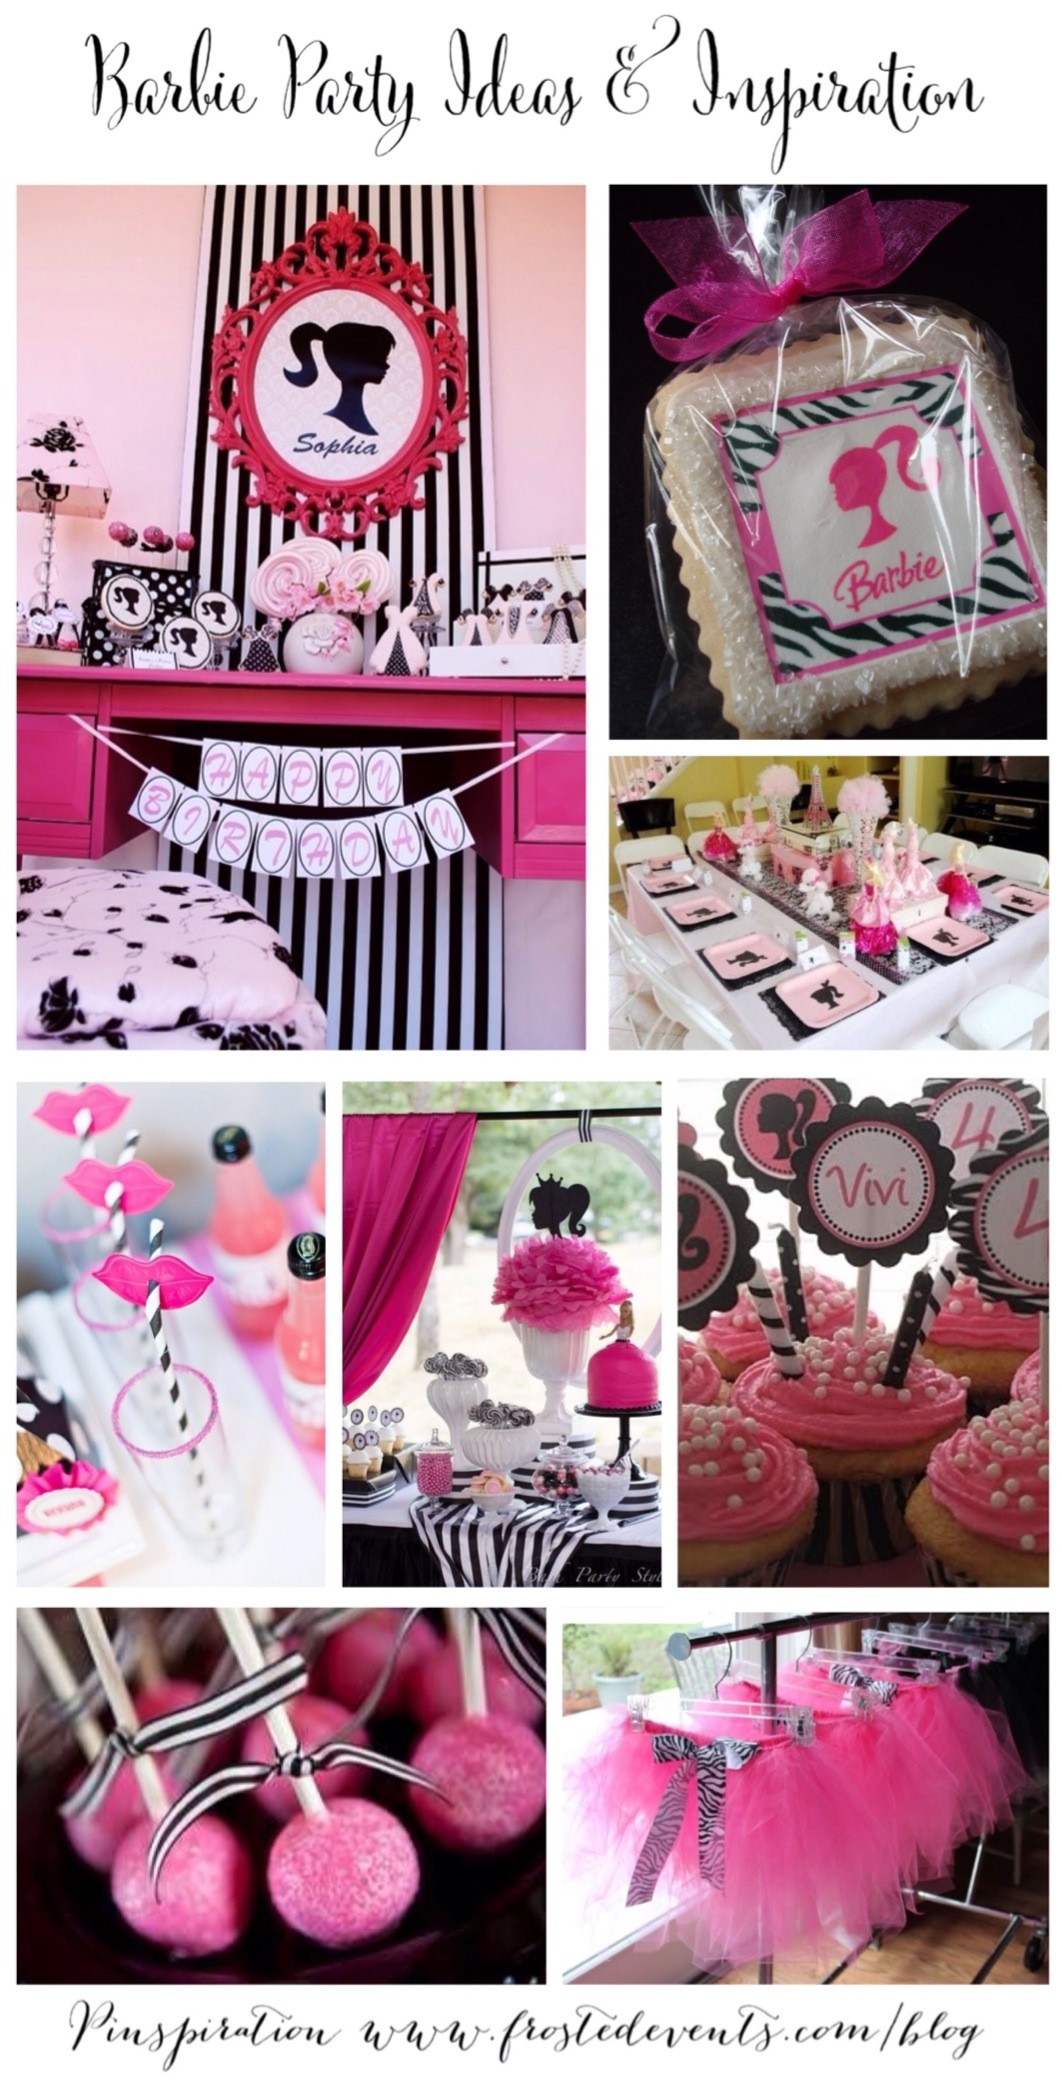 Vintage Barbie Doll Theme Party Ideas & Inspiration www.frostedevents.com